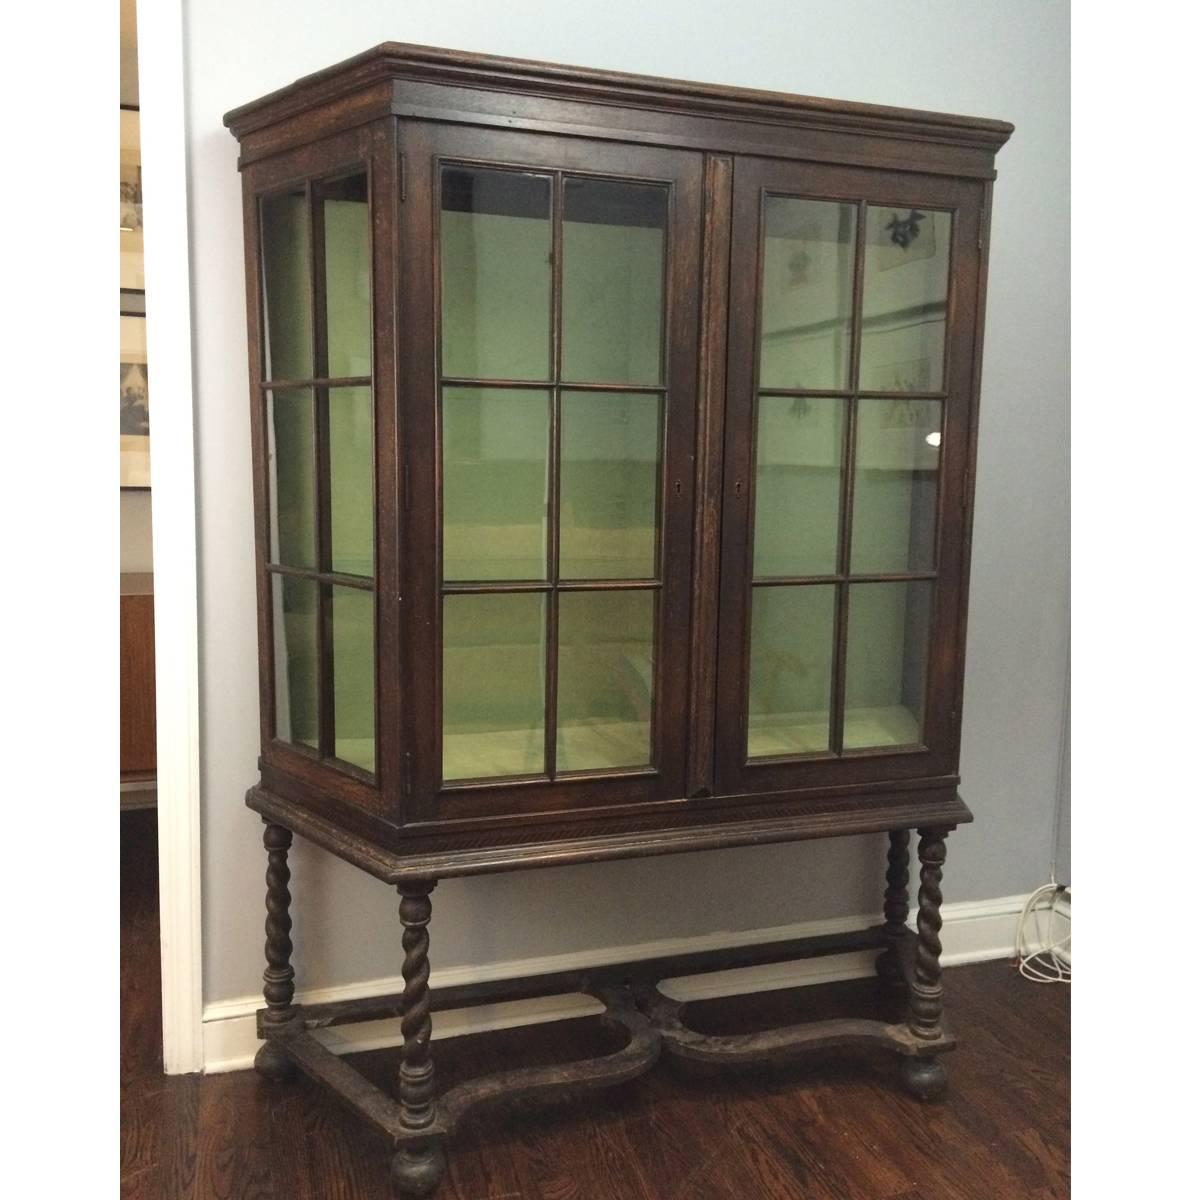 Dark oak curio or China cabinet in the Jacobean Revival style comprised of a felt-lined glass case with two doors and two glass shelves resting on a base of four barley twist legs connected by stretchers on bun feet. Cabinet is trapezoidal and